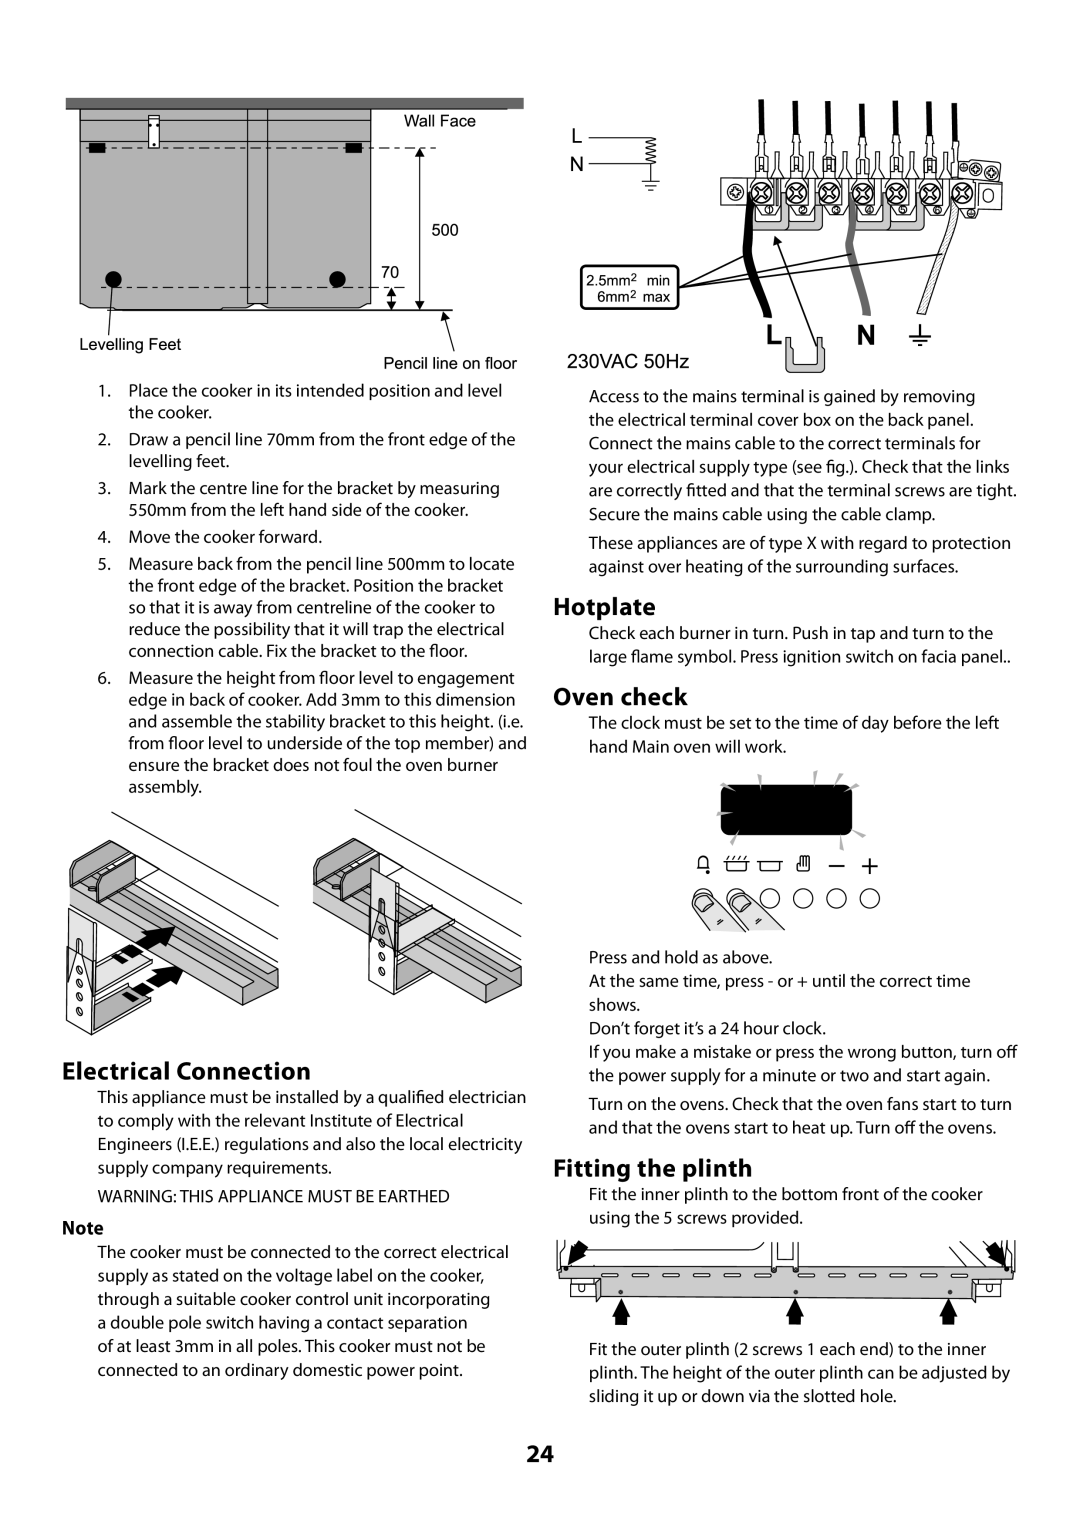 Rangemaster U109720 - 01 manual Electrical Connection, Hotplate, Oven check, Fitting the plinth 